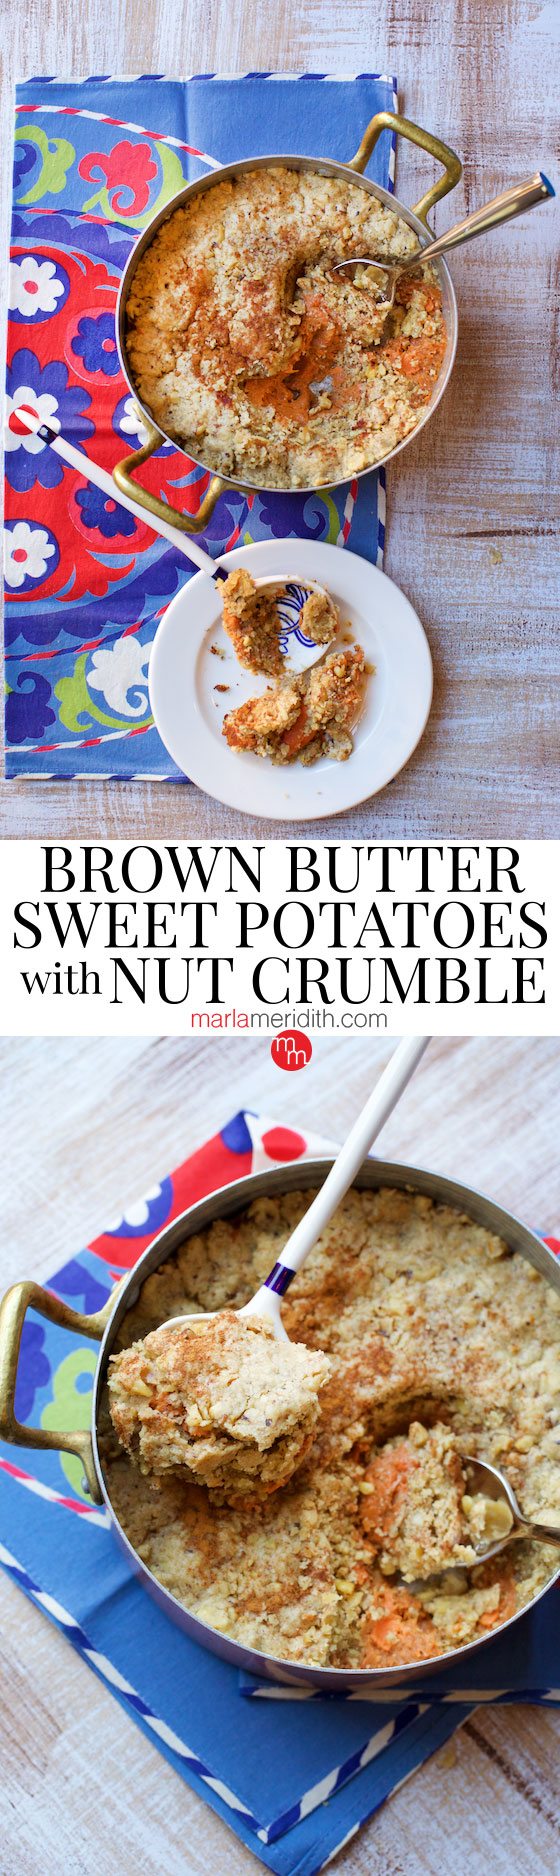 Brown Butter Sweet Potatoes with Nut Crumble recipe. This side dish with be a hit at your holiday table! MarlaMeridith.com ( @marlameridith )